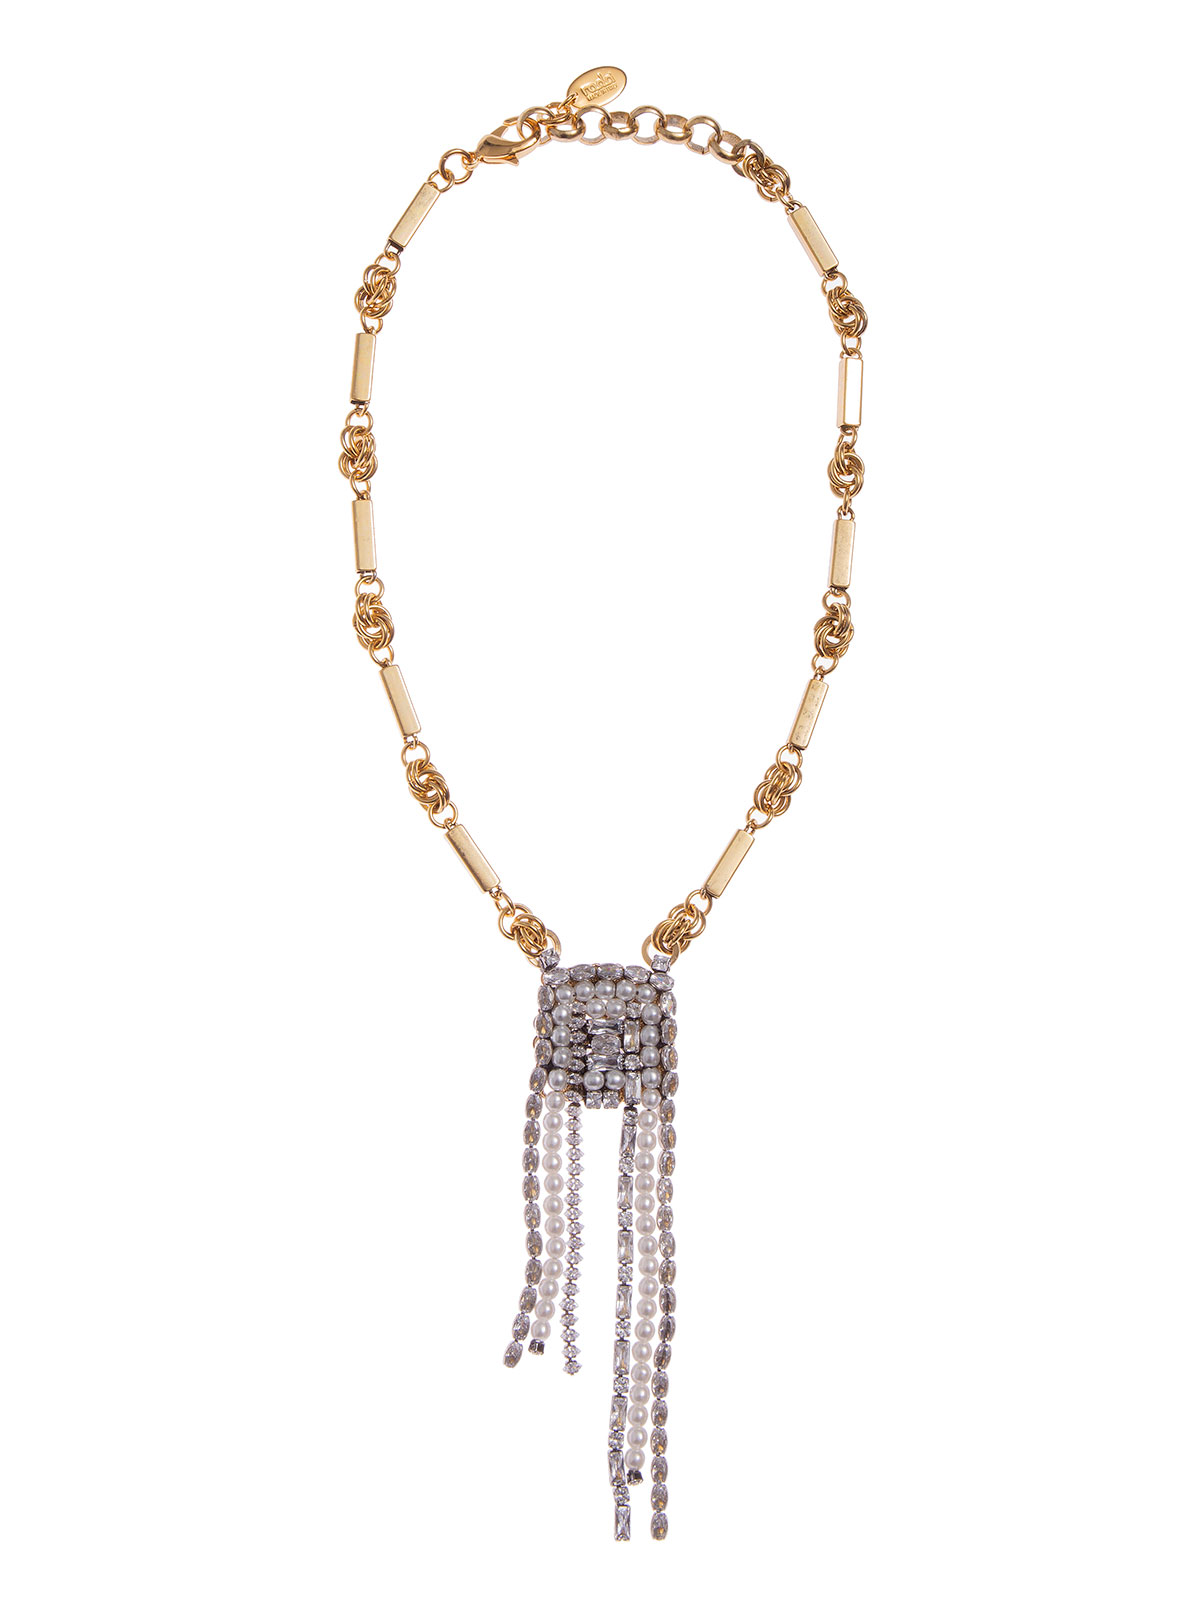 Chain necklace with central jewel decoration